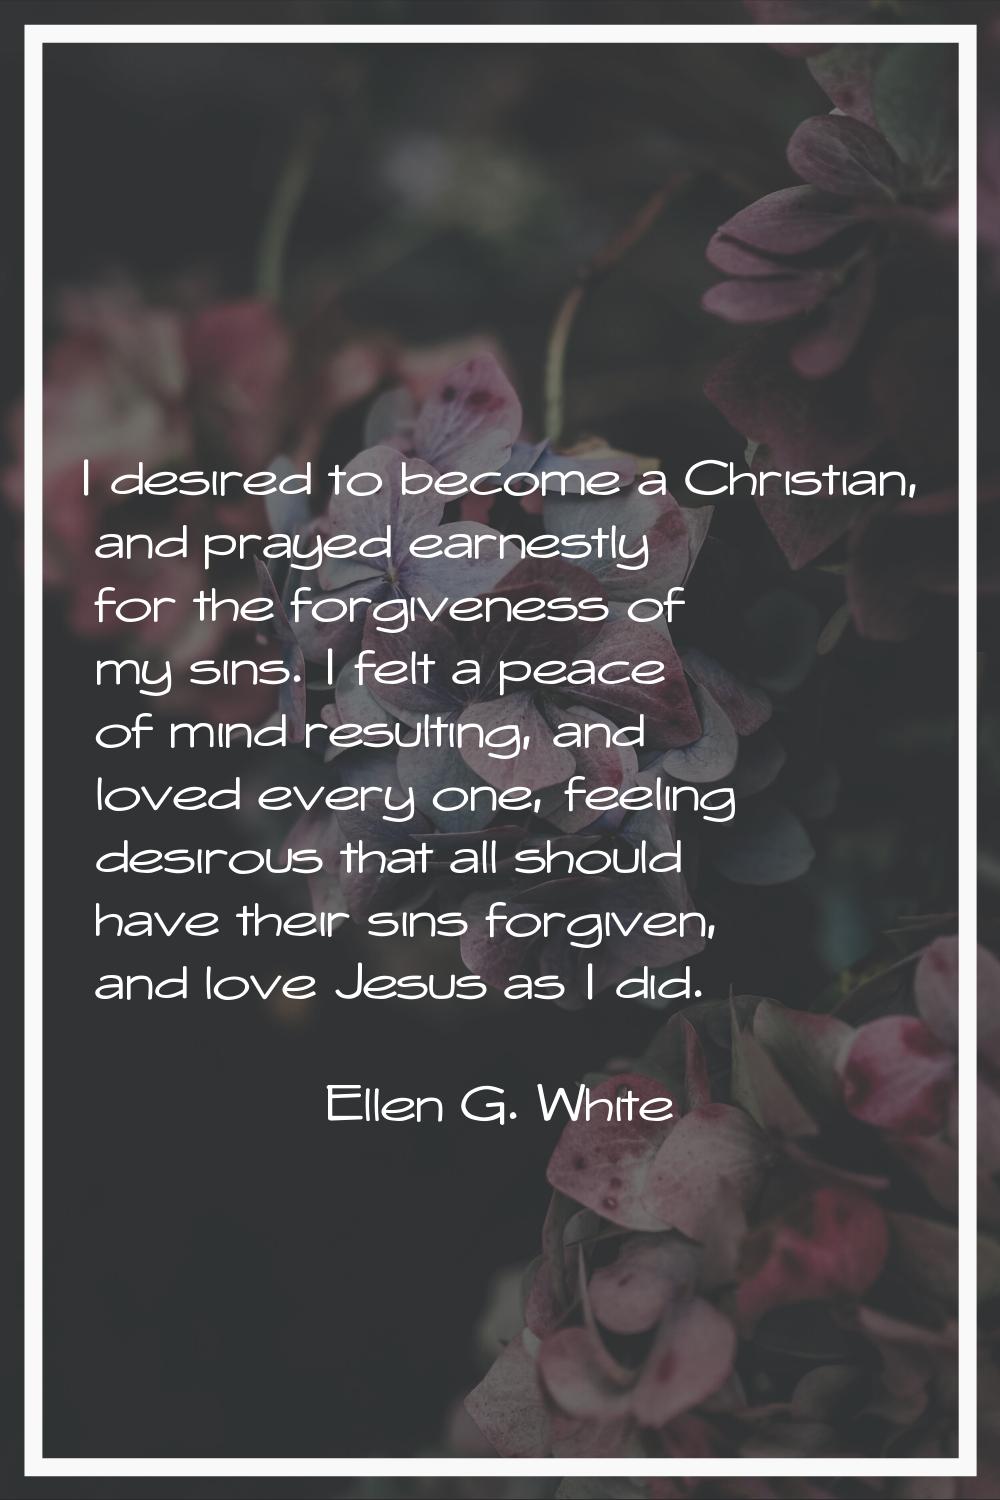 I desired to become a Christian, and prayed earnestly for the forgiveness of my sins. I felt a peac